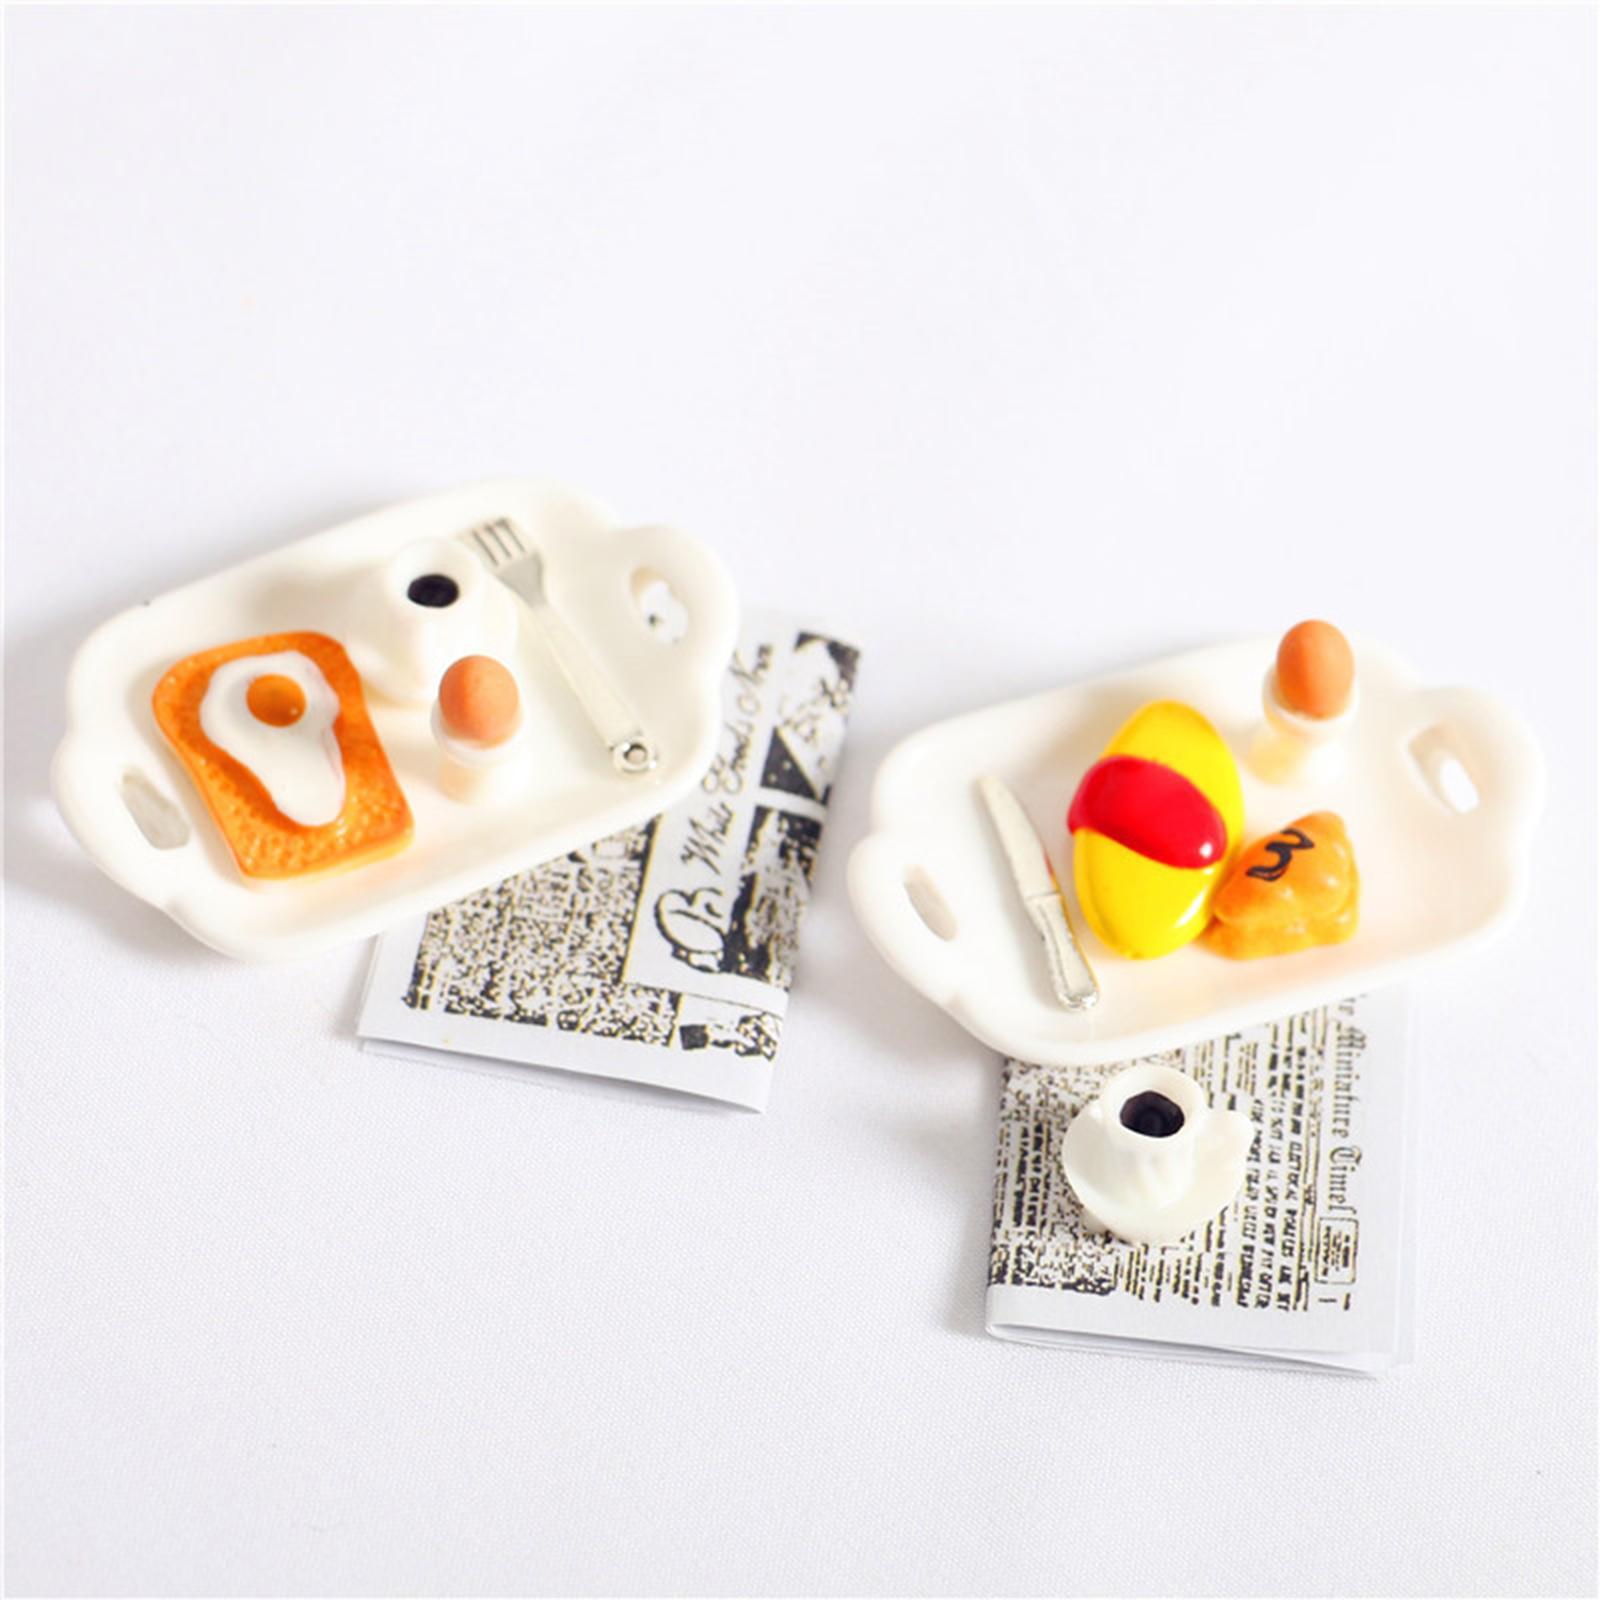 Mini 1:12 Dollhouse Food Set Kitchen Accessories Tiny Food Model Cooking Game for DIY